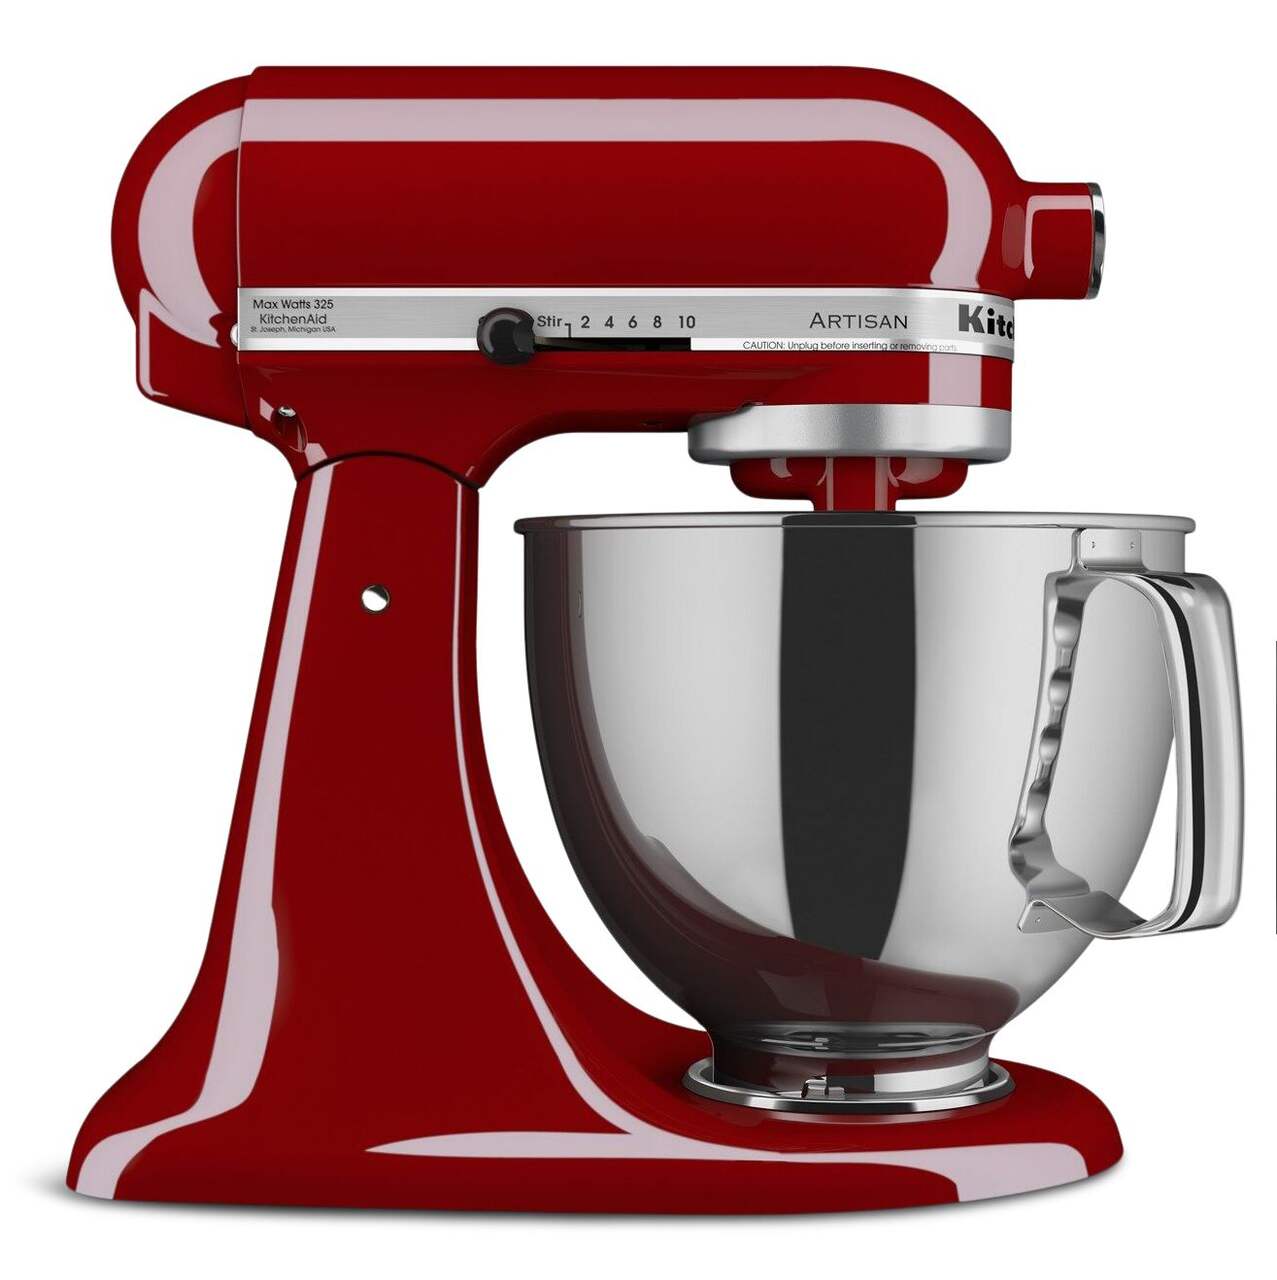 https://media-www.canadiantire.ca/product/living/kitchen/kitchen-appliances/0431406/artisan-stand-mixer-empire-red-941291d7-58a7-49e1-abfb-77ca1ec20870-jpgrendition.jpg?imdensity=1&imwidth=640&impolicy=mZoom